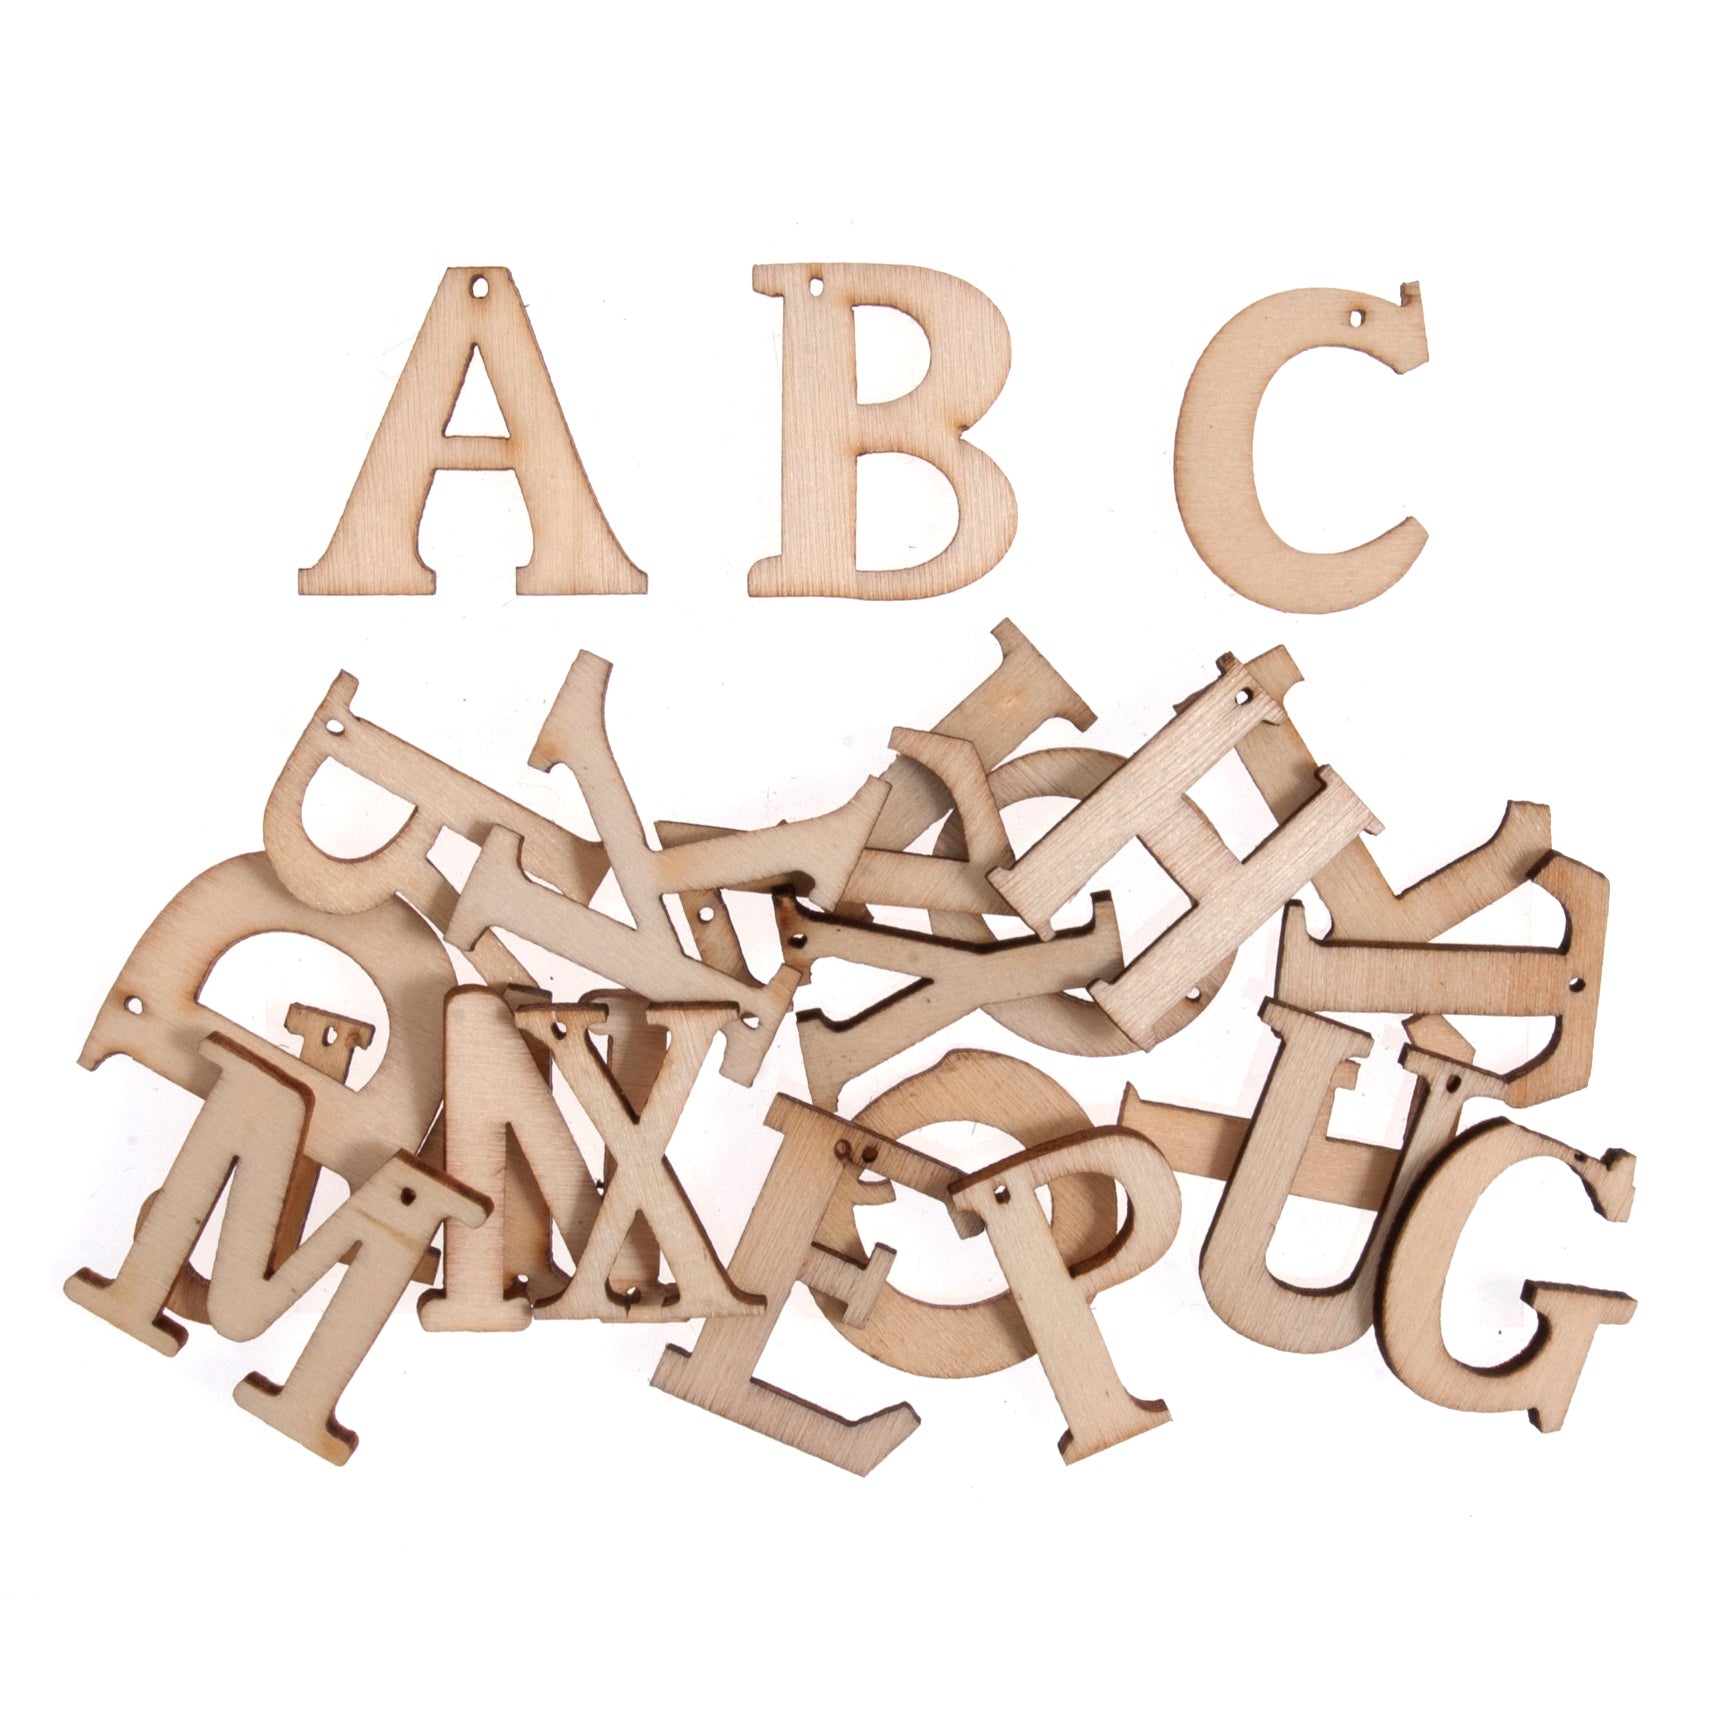 Craft Embellishments: Natural Wood Letters - 26pc